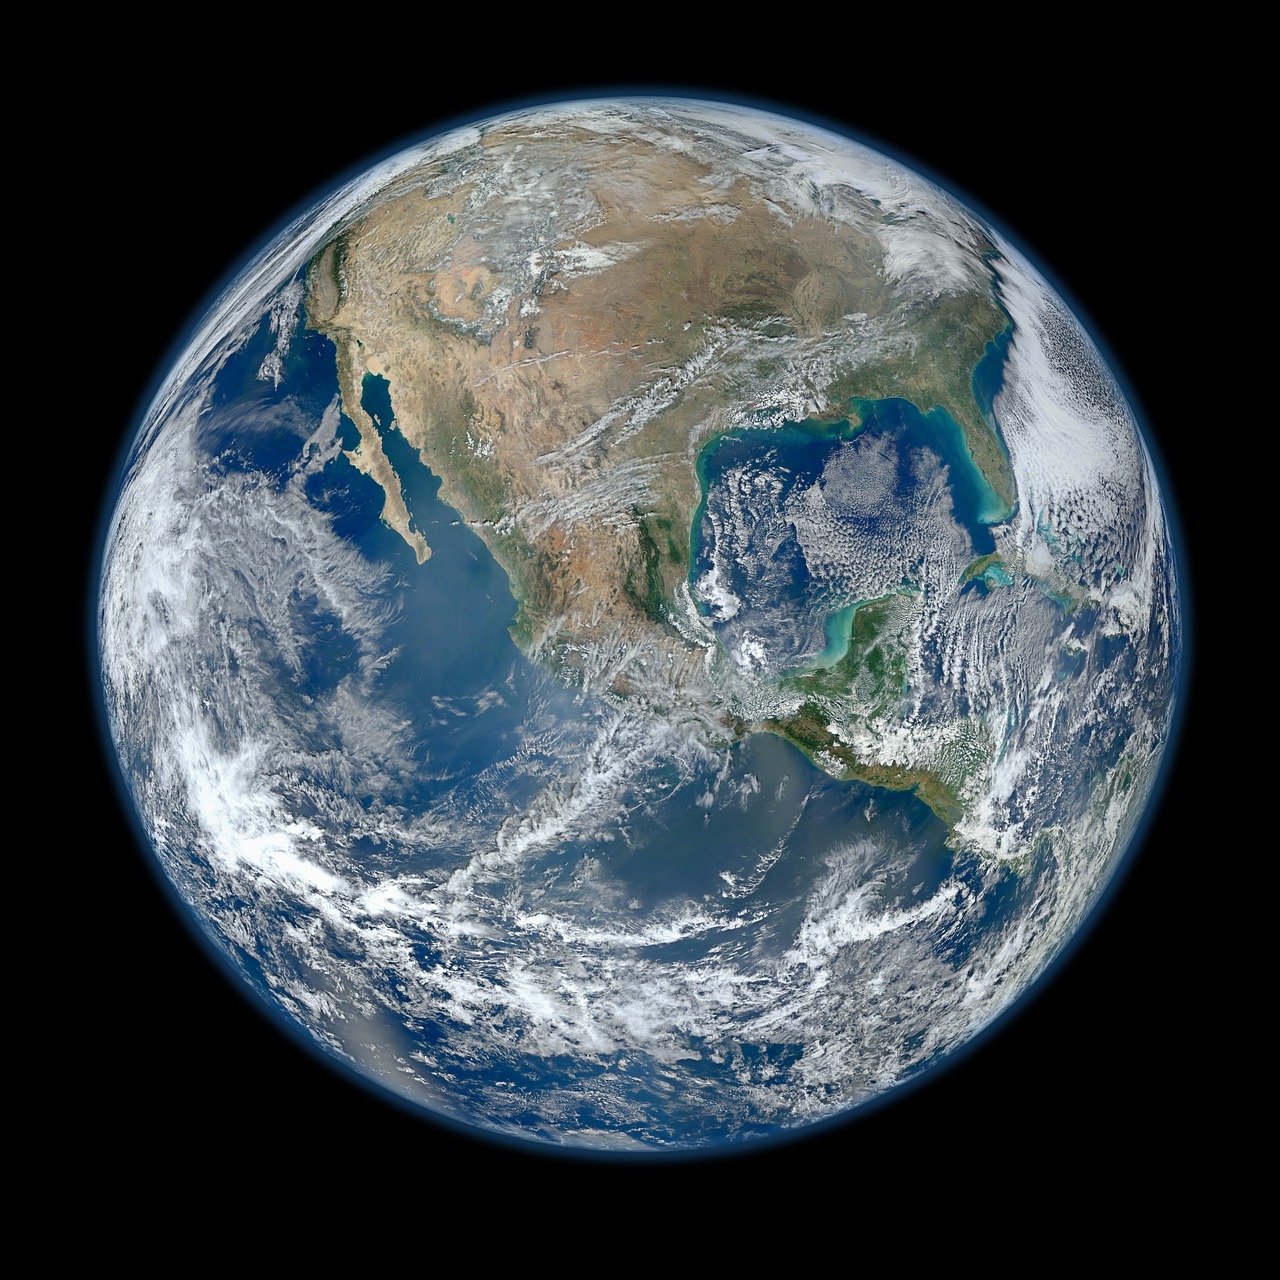 Image - world earth planet globe spaceview